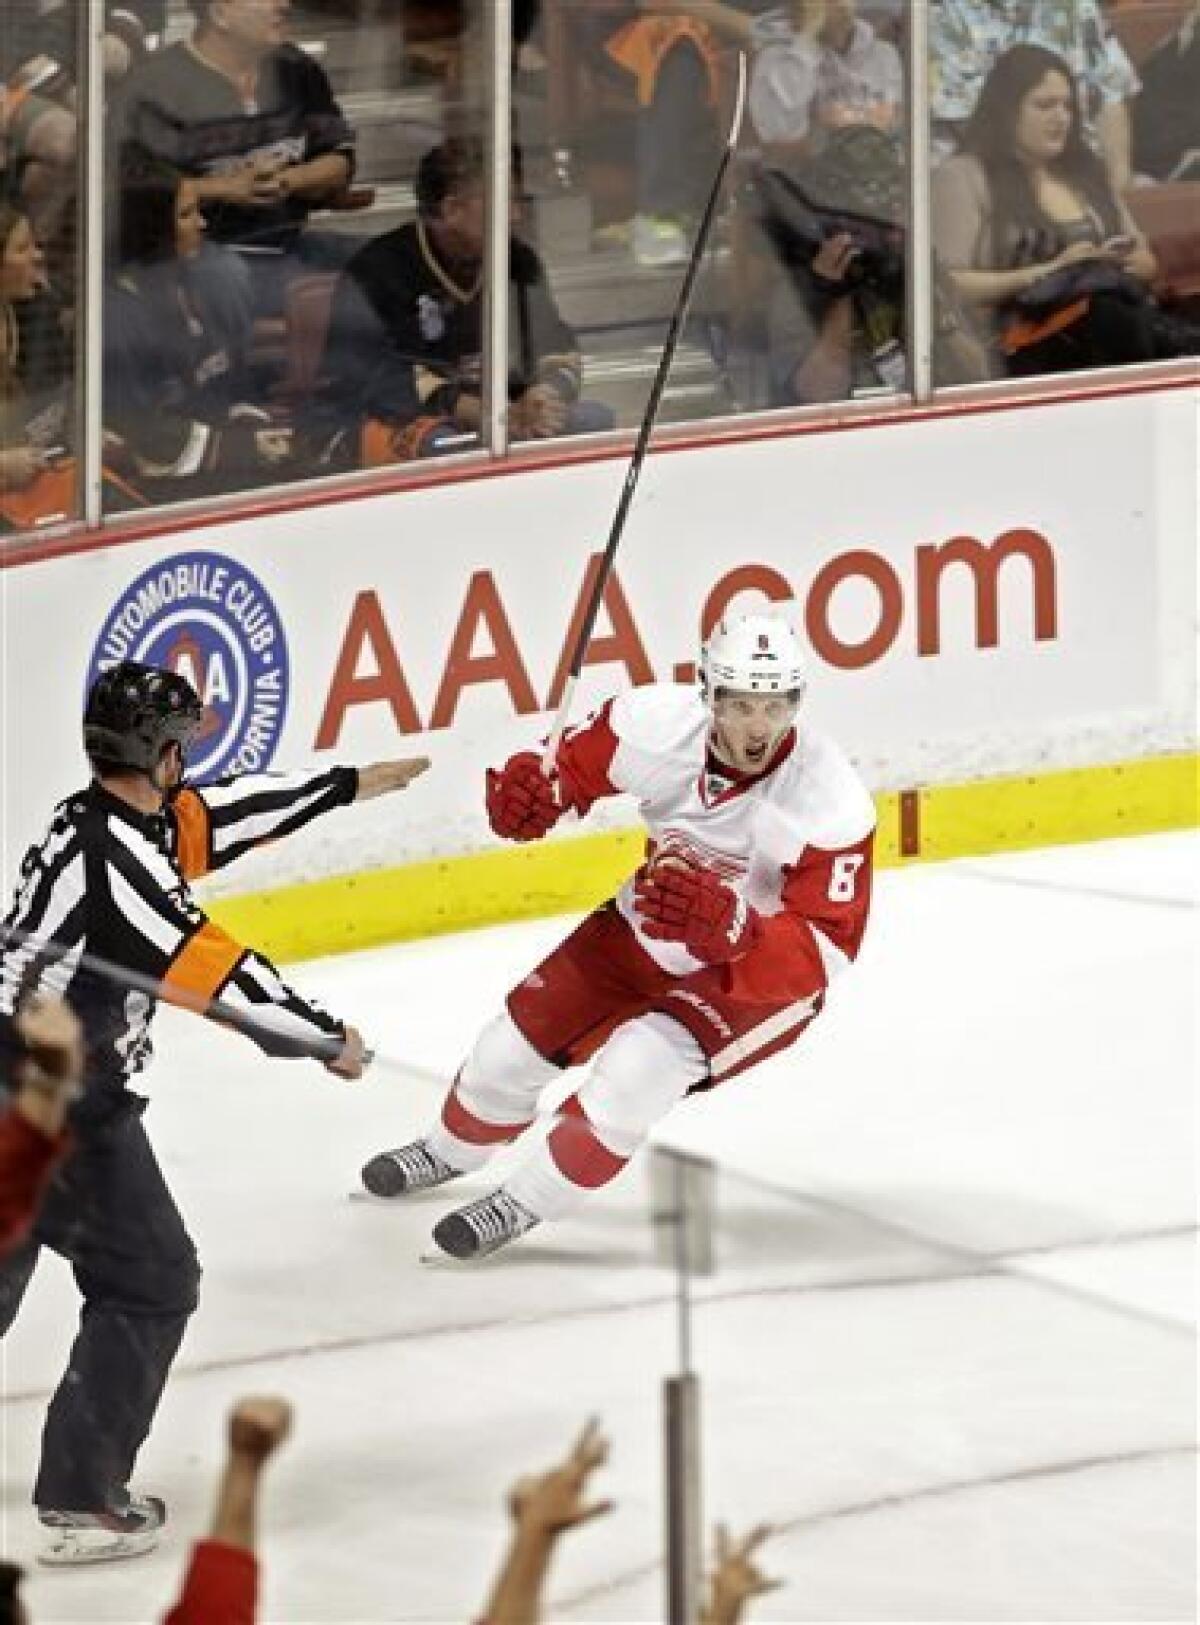 Detroit Red Wings vs. Anaheim Ducks 2023 Matchup Tickets